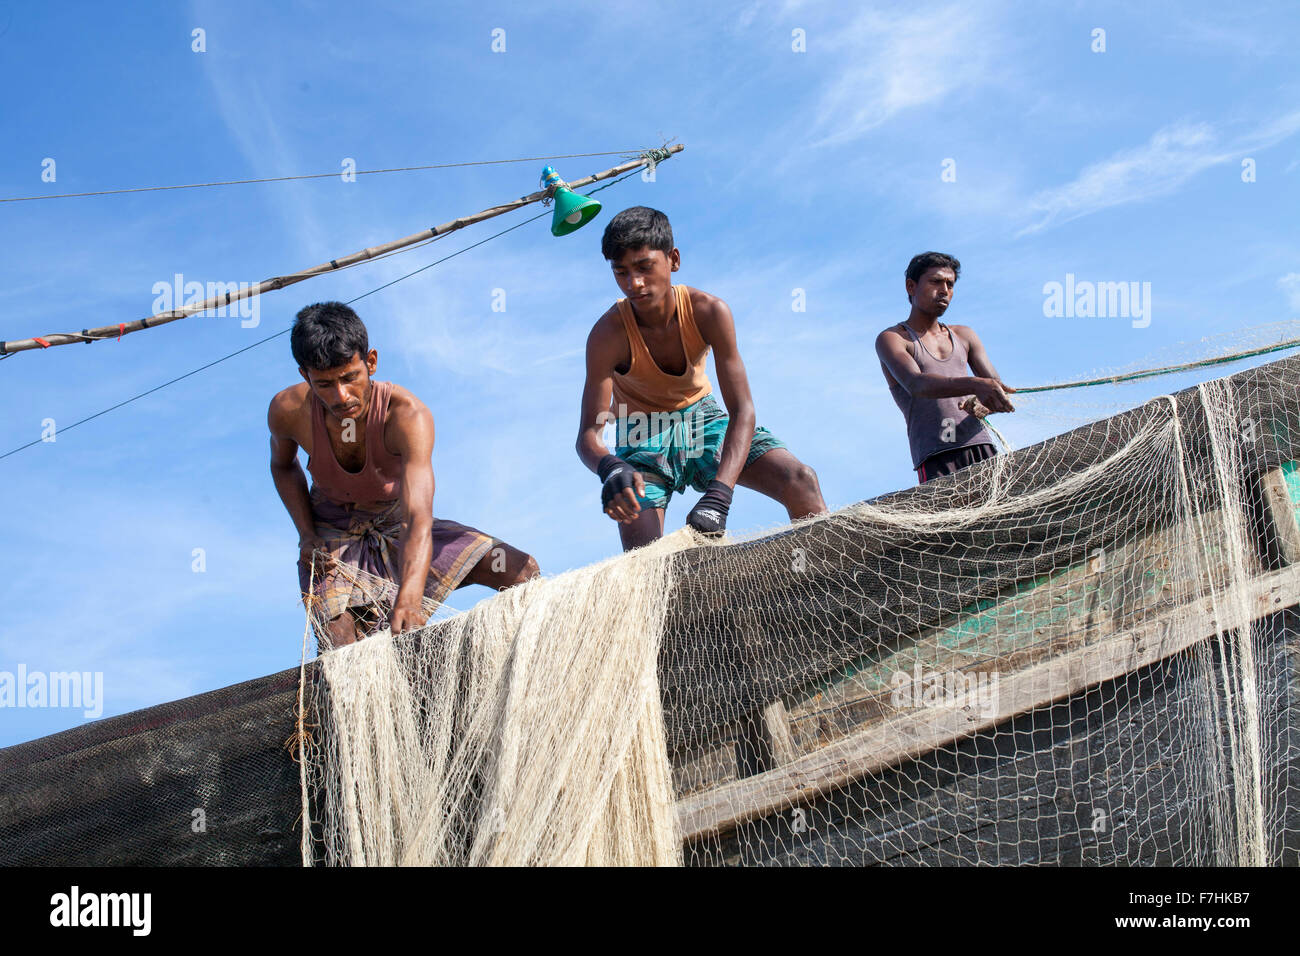 COX's BAZAR, BANGLADESH - November 29:Fisher man of Climate Change and Sea Level Raise area repairing their net to fishing in the sea near Kutubdia Islandof Cox's Bazar Dstrict on November 29, 2015.  Kutubdia, an island off the Cox's Bazar coast. the adversities of nature induced mainly by climate change. During the last two decades the impacts of climate in Bangladesh have been accellerating.Kutubdia is also hit hard. The place is very vulnerable to cyclones and storm surges, which have become more frequent and intense in Bangladesh, as well as rising sea-level and stronger waves. The result  Stock Photo